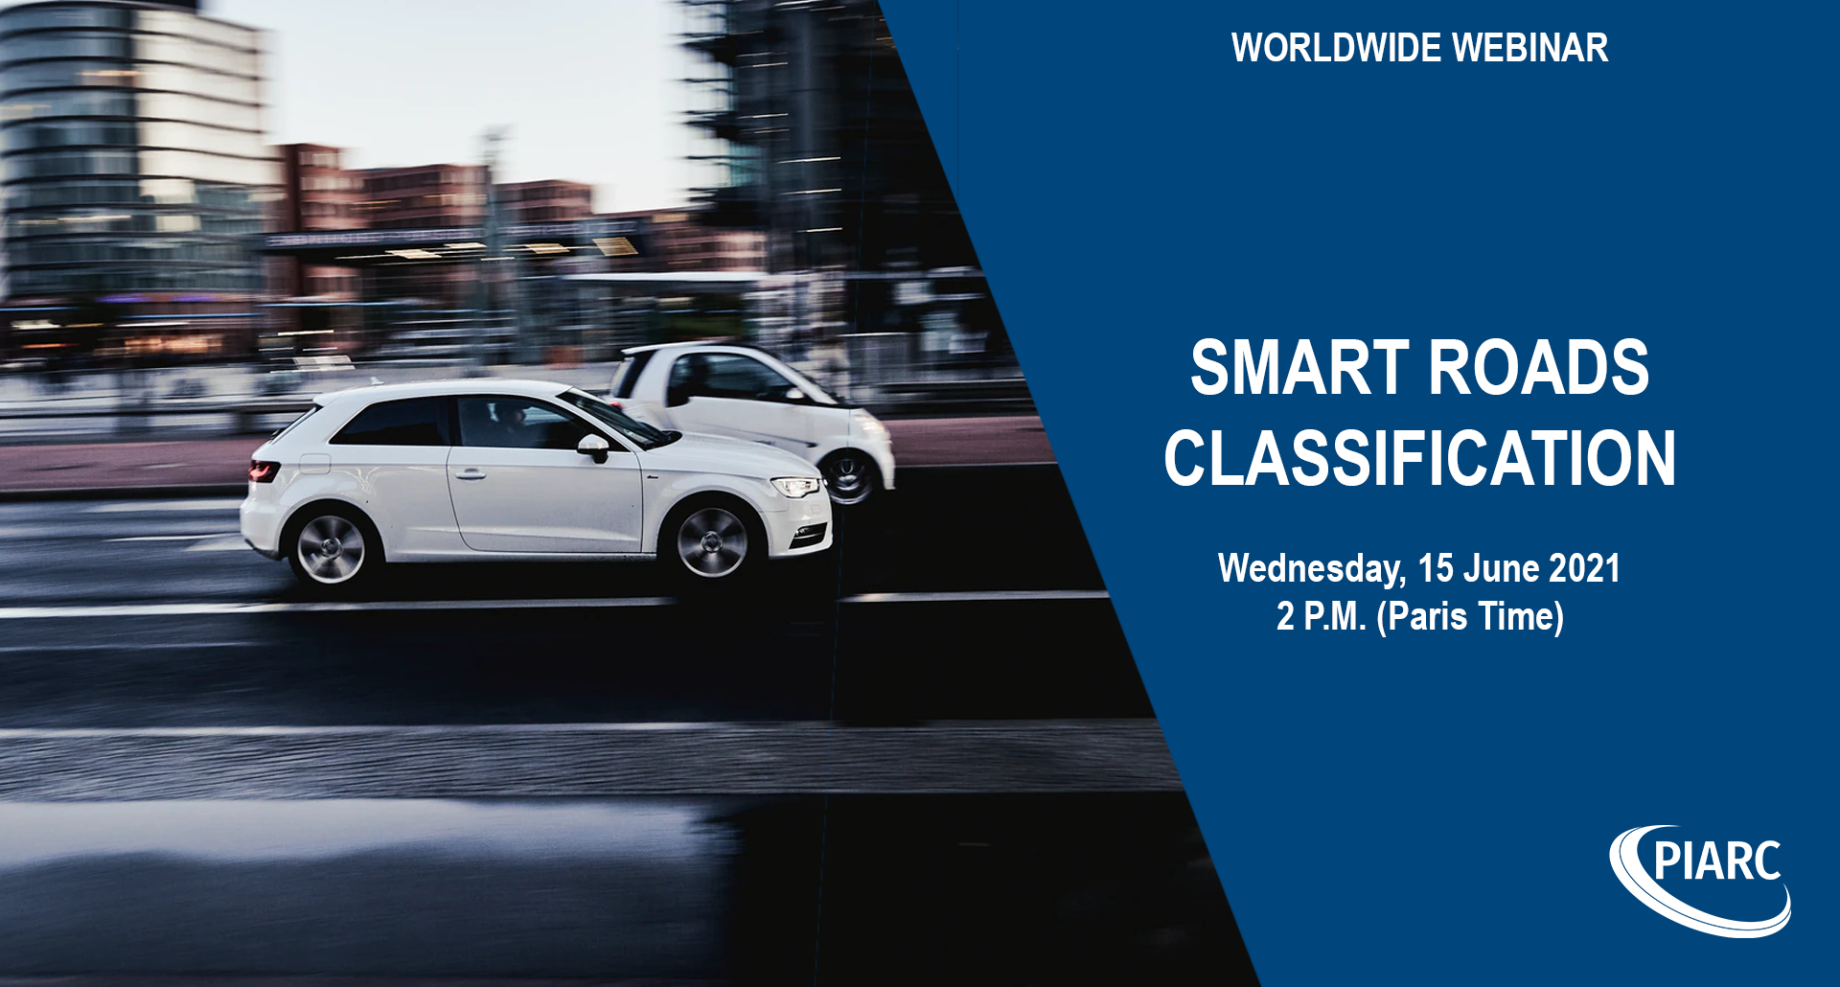 Are you an expert in Smart Roads Classication: this webinar and survey are for you